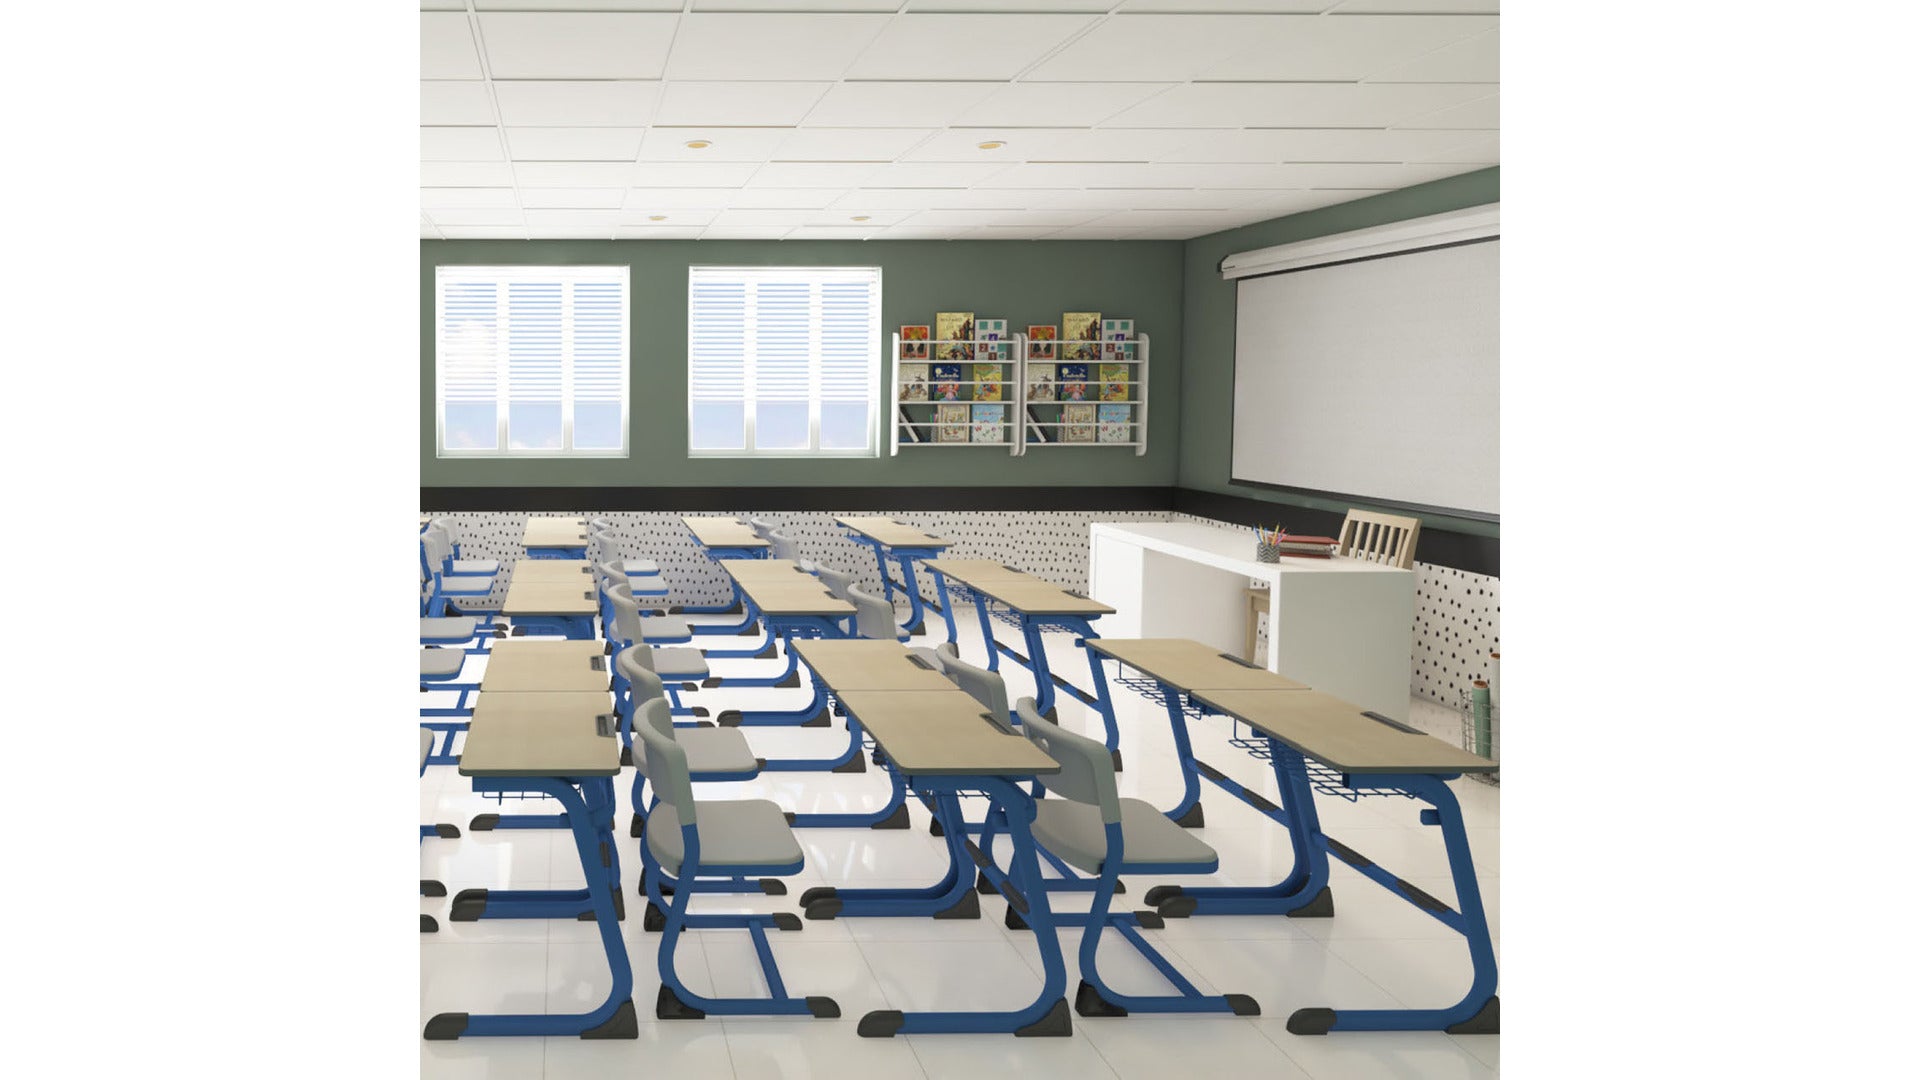 How To Create a Comfortable And Inviting Atmosphere In The Classroom